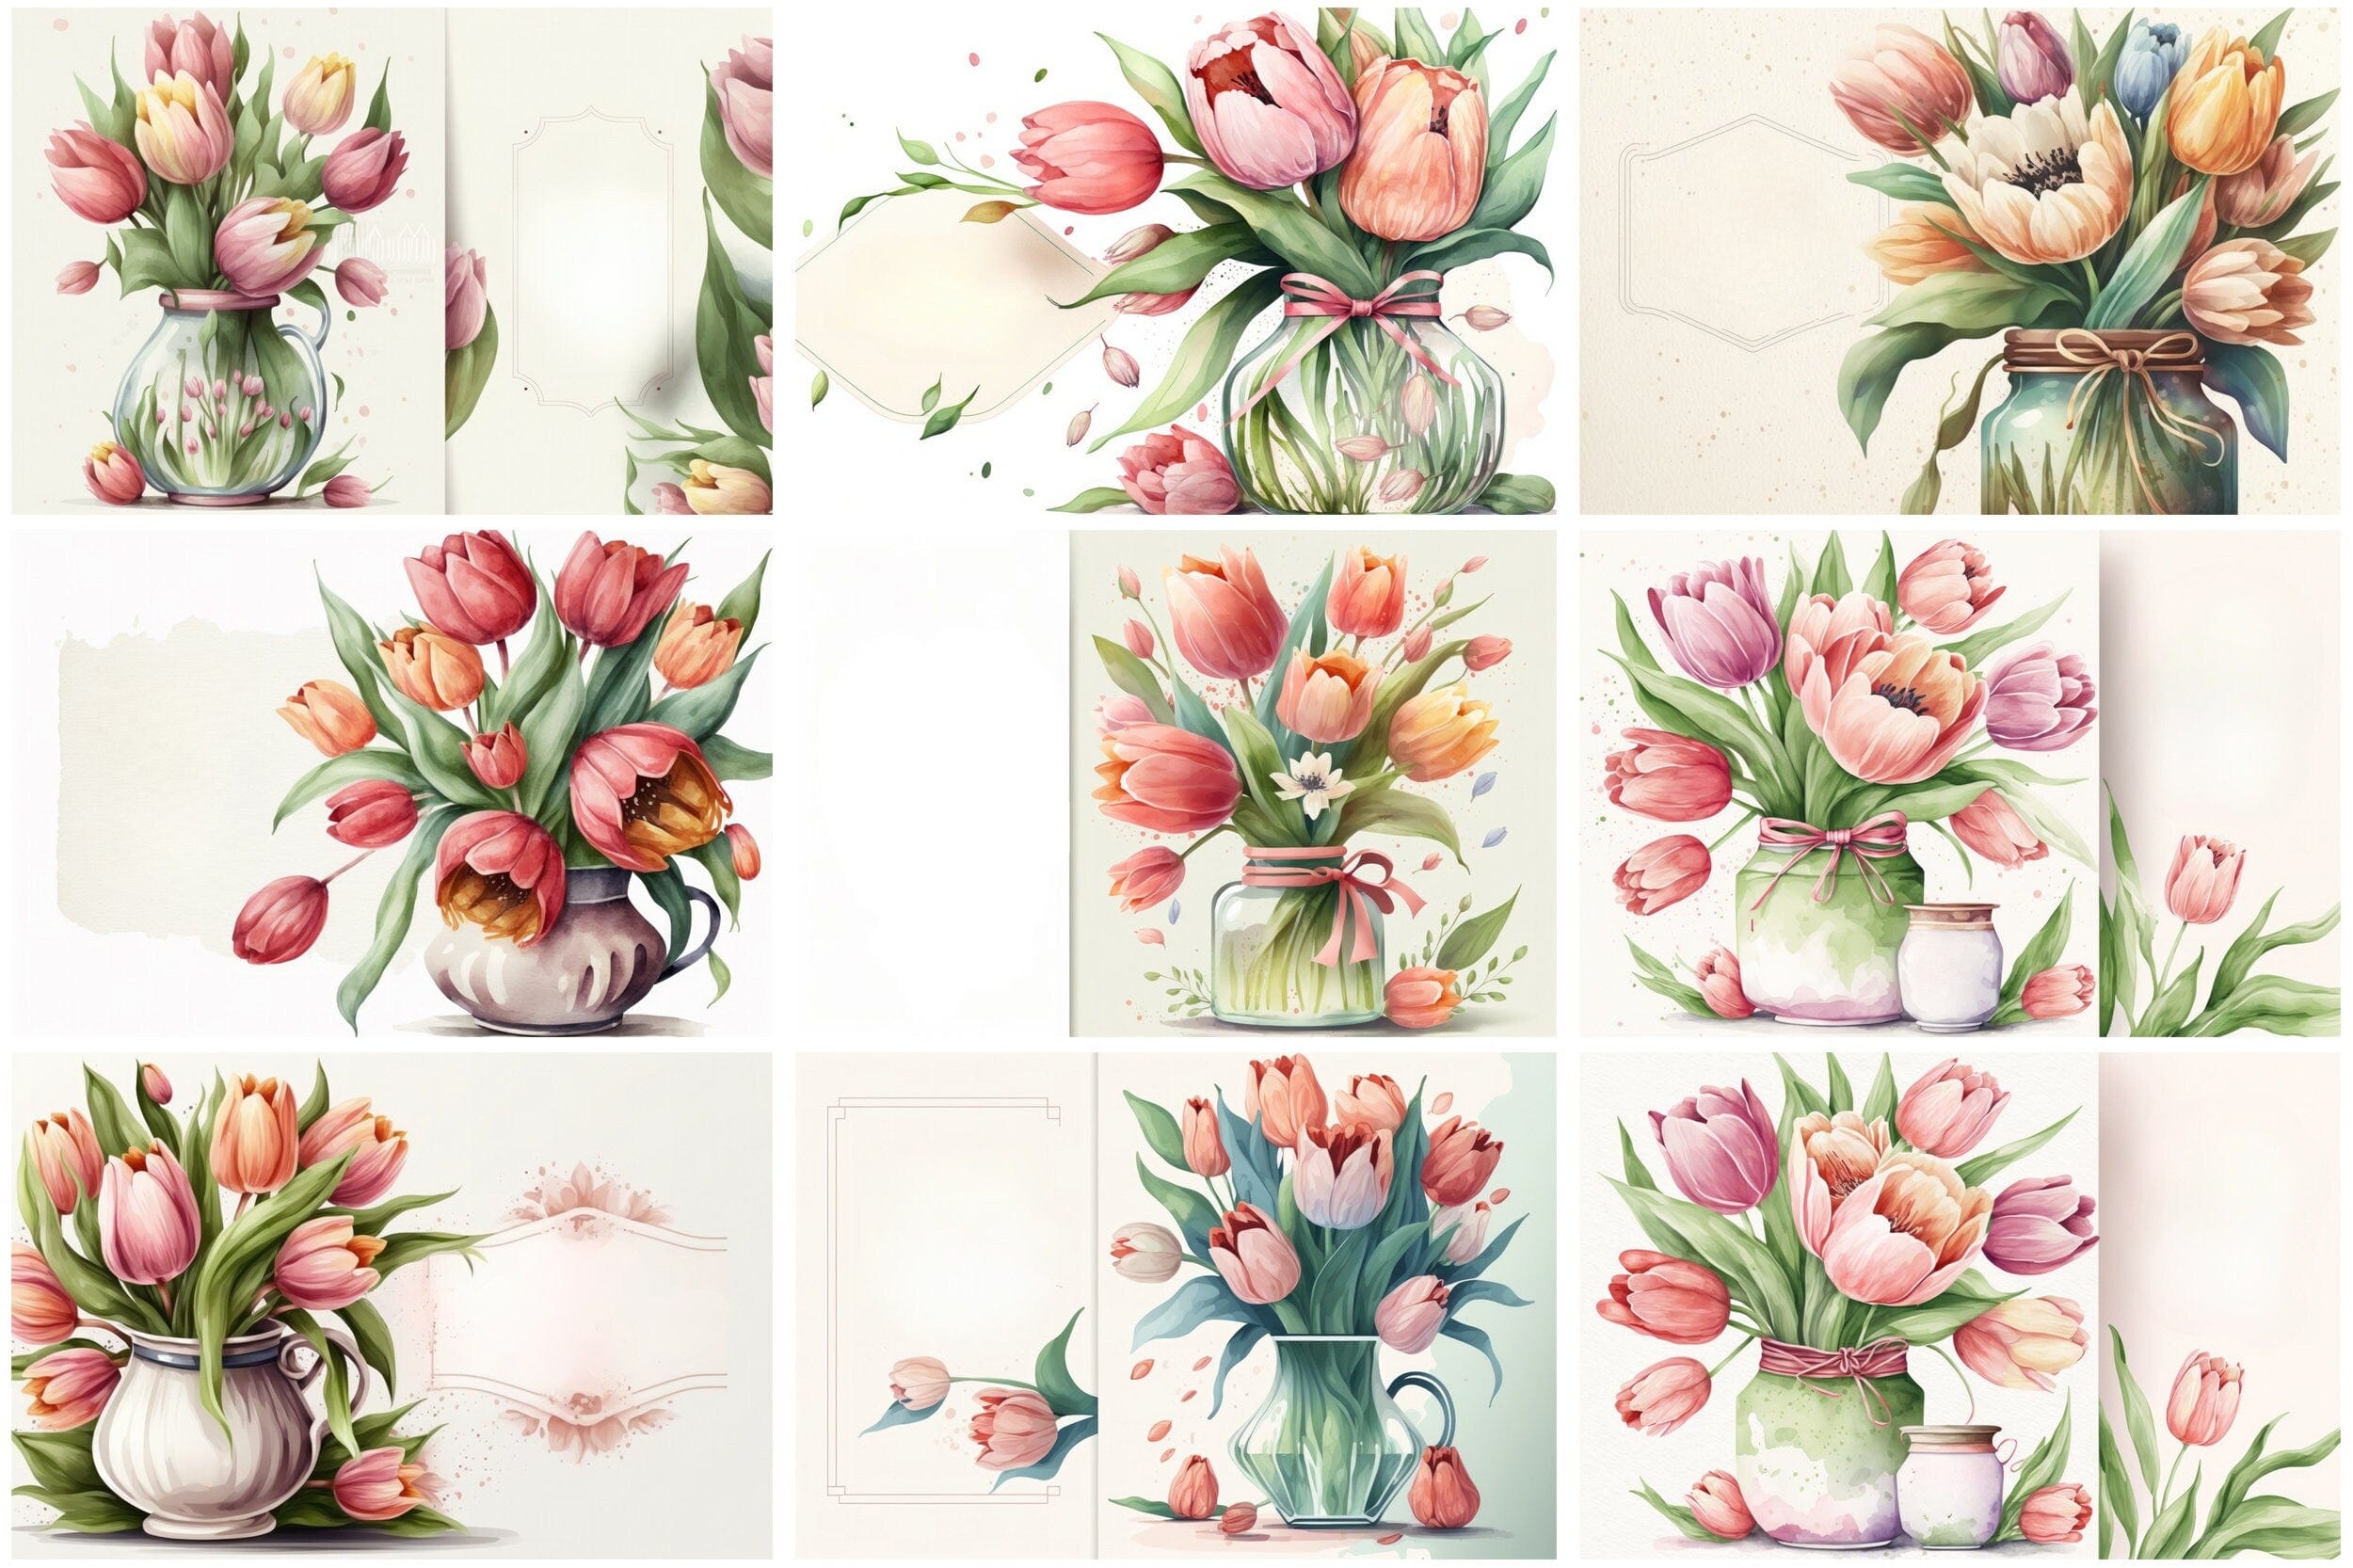 70 Stunning Tulip Images Bundle: Perfect for Banners & Cards - High-Resolution, Royalty-Free, and Ready for Instant Download Digital Download Sumobundle